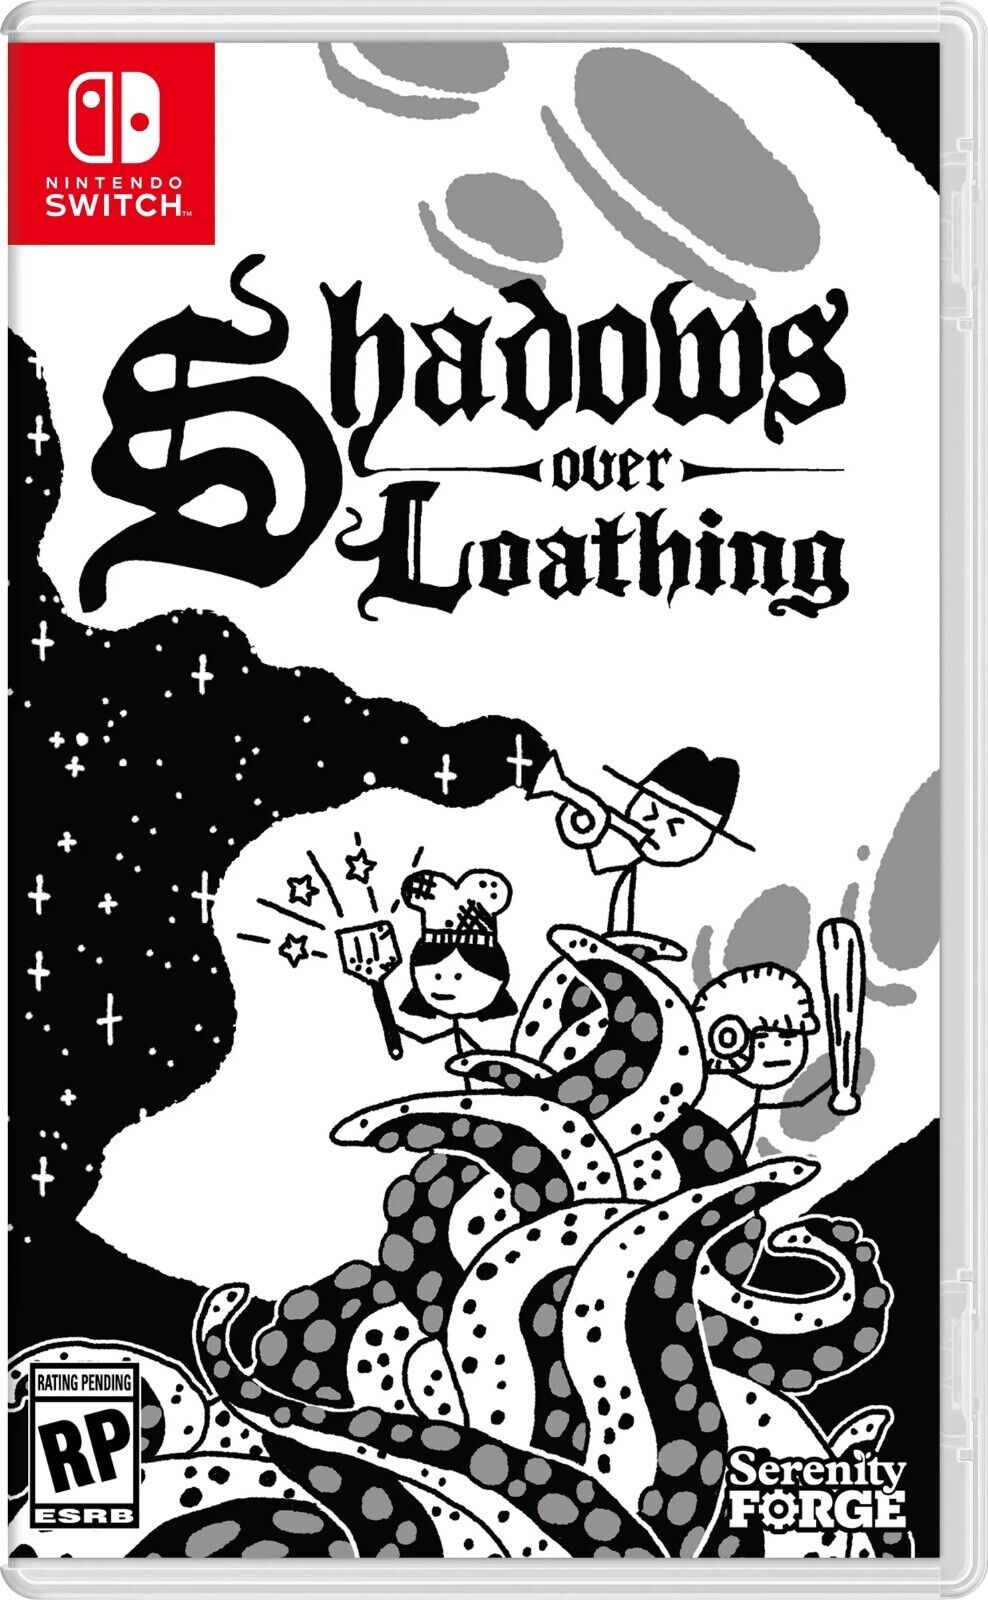 NSW - SHADOWS OVER LOATHING [PHYSICAL EDITION] Brand New